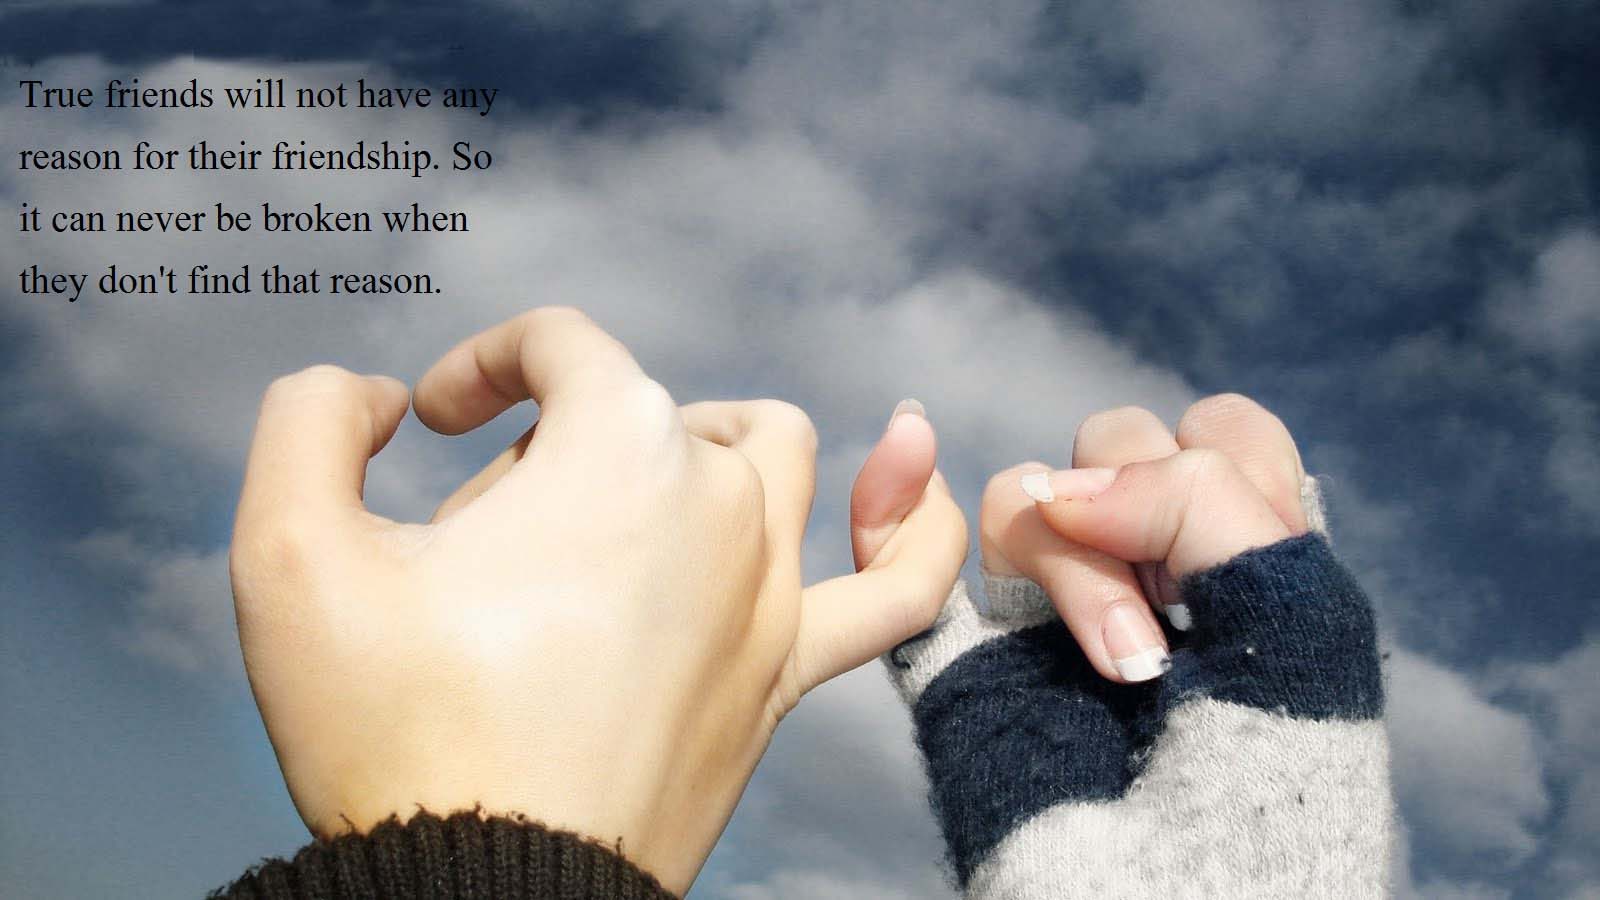 Wallpaper For Desktop With Friendship Quotes